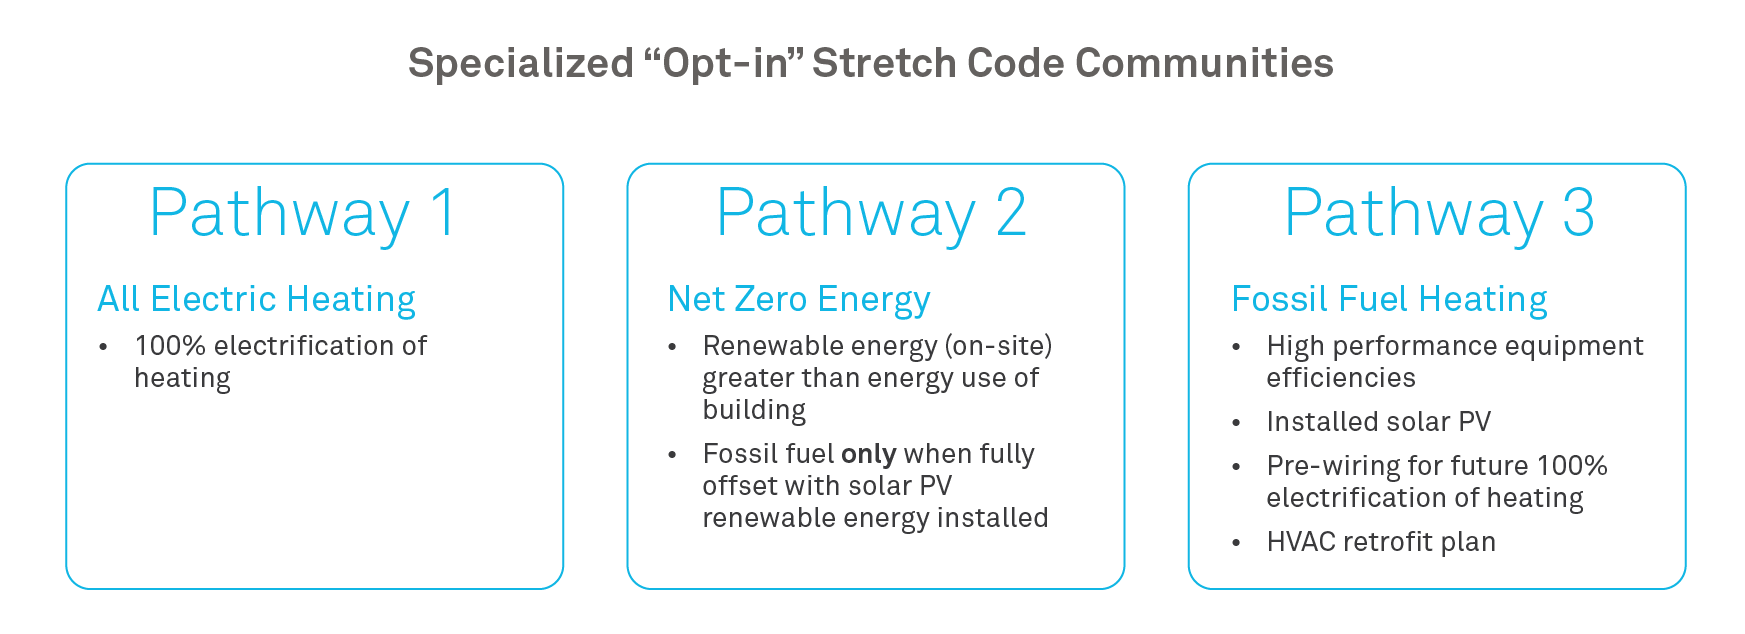 Graphic showing Massachusetts specialized stretch energy code pathways